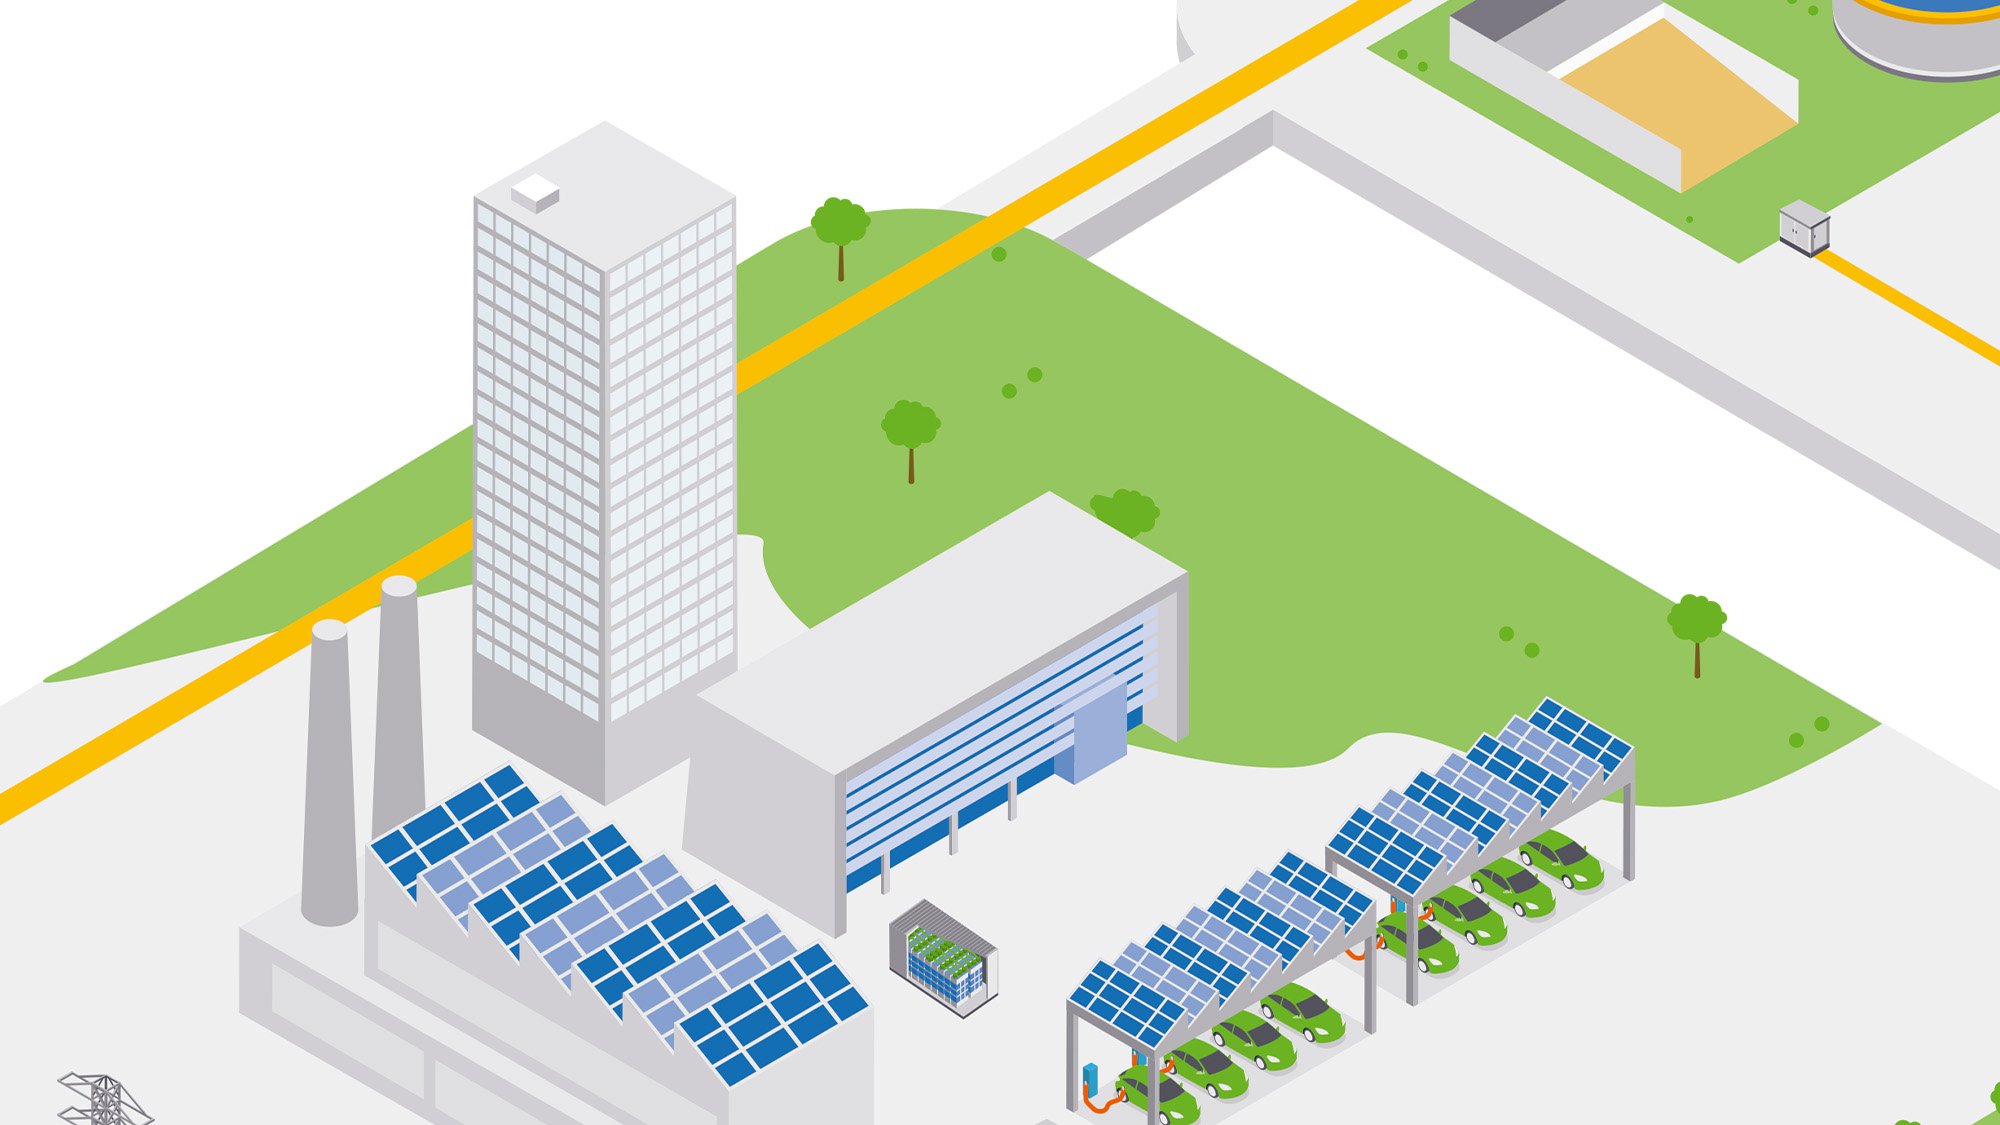 MM-429093_new_website_page_overview-microgrid_energiemanagement_2000x1125.jpg